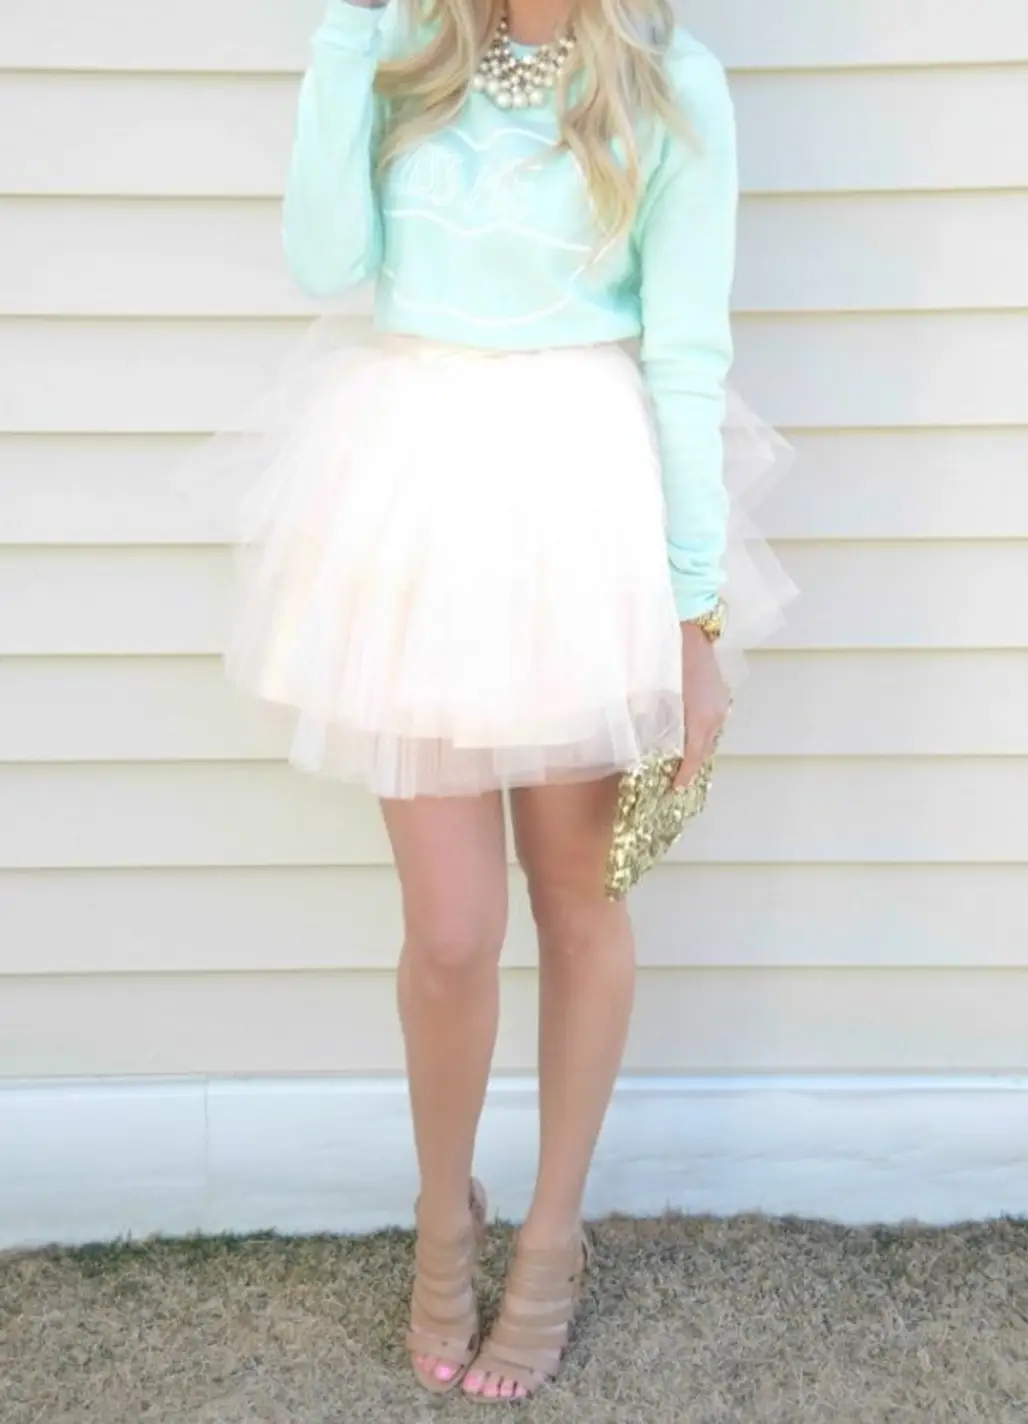 Concert outfit ideas  Tennis skirt outfit, Tulle skirts outfit